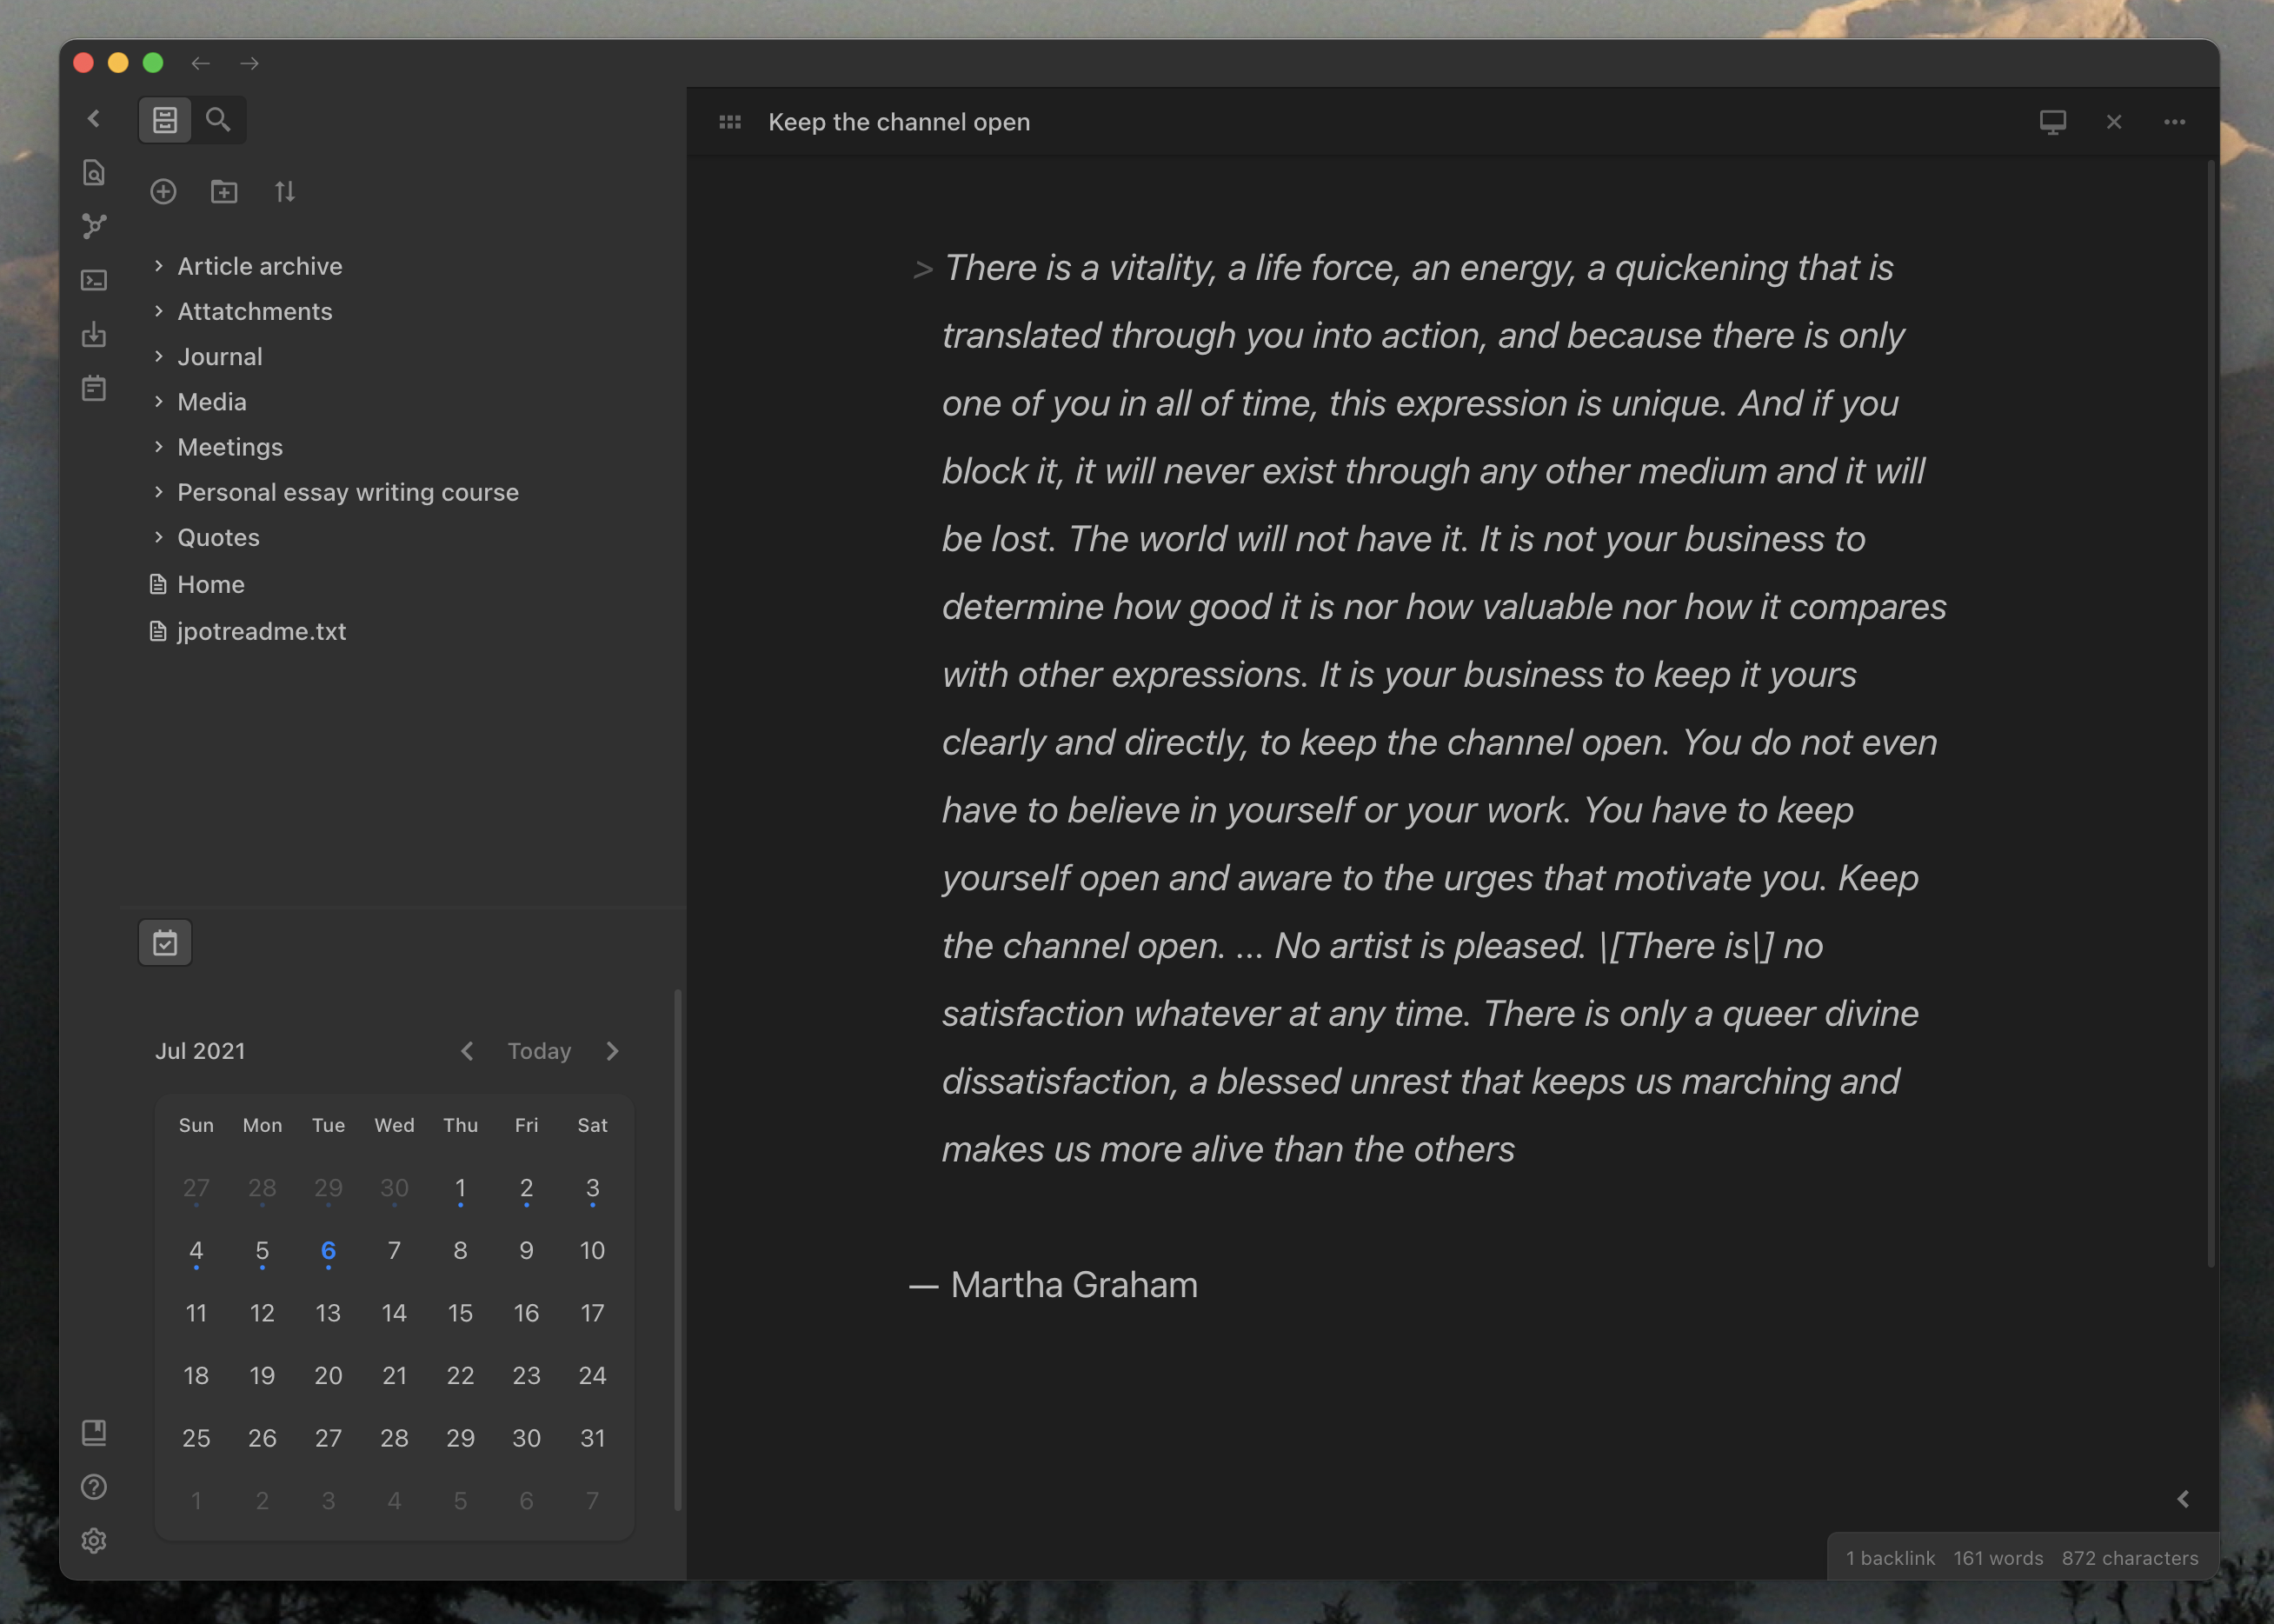 mac book app for box notes